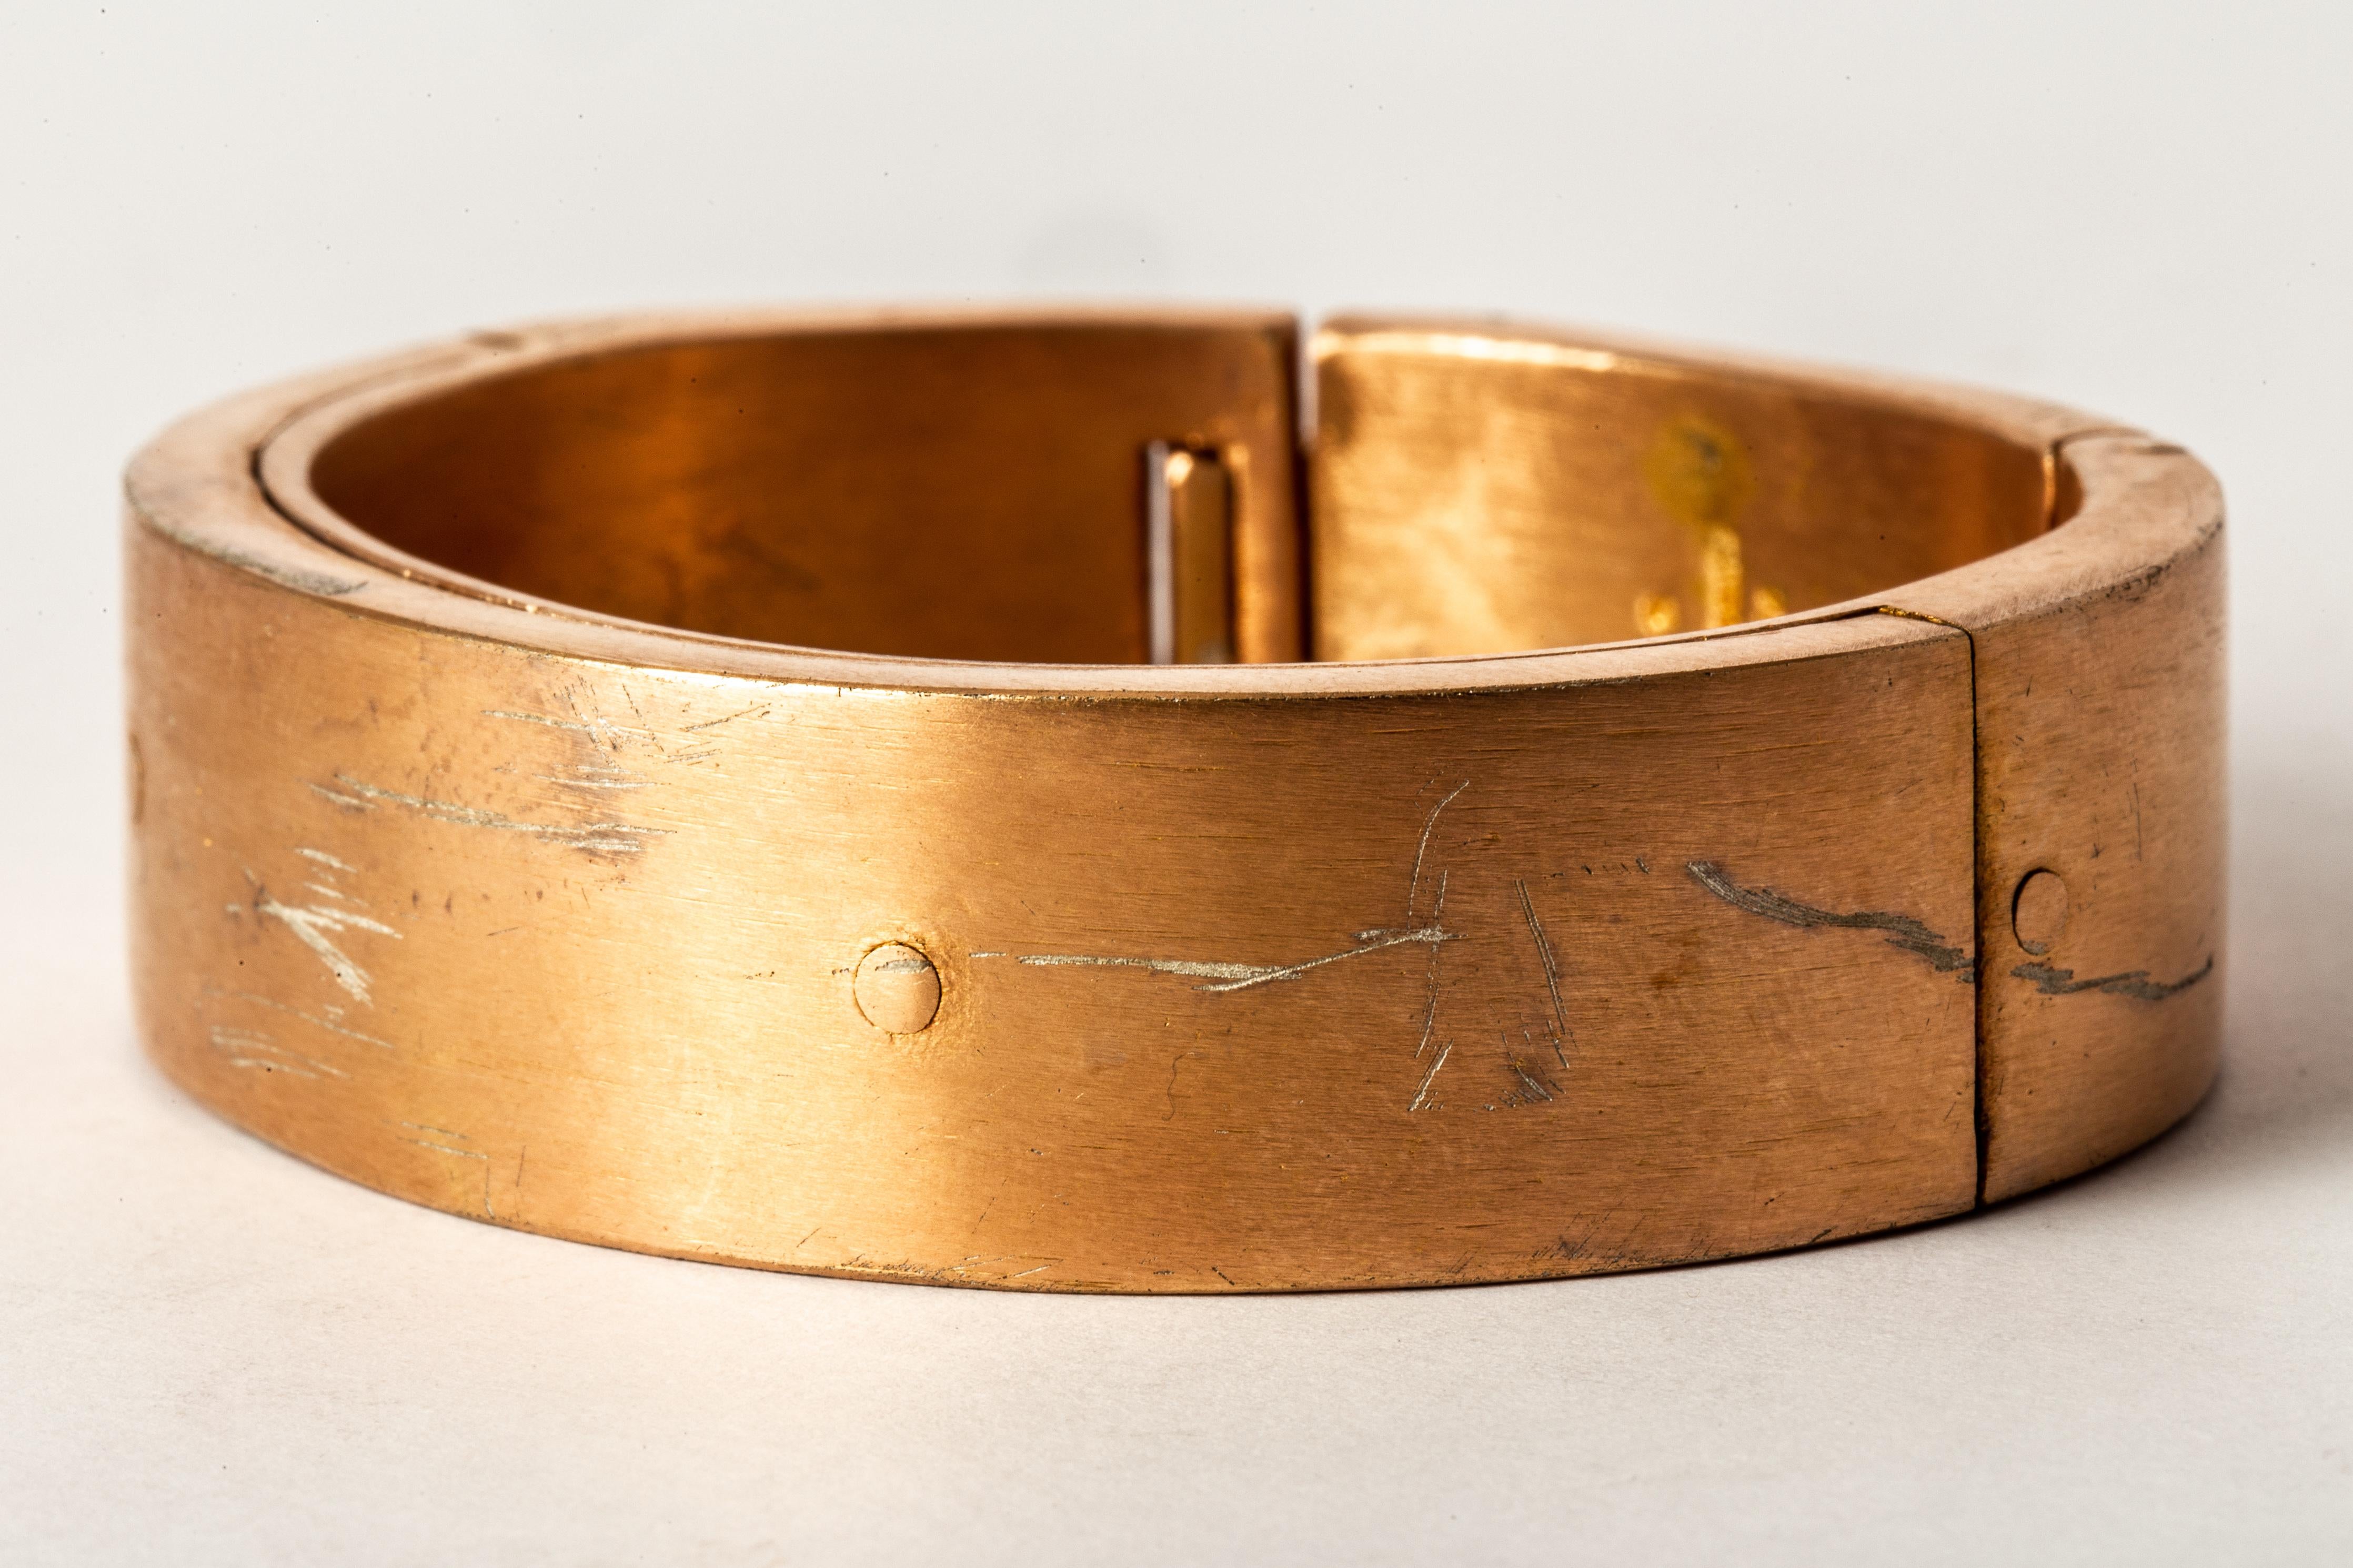 Bracelet in sterling silver, 18k solid rose gold plated on the surface and then dipped in acid to create distressed look. The Sistema series expresses the core principle of P/4 which is modularity. The 